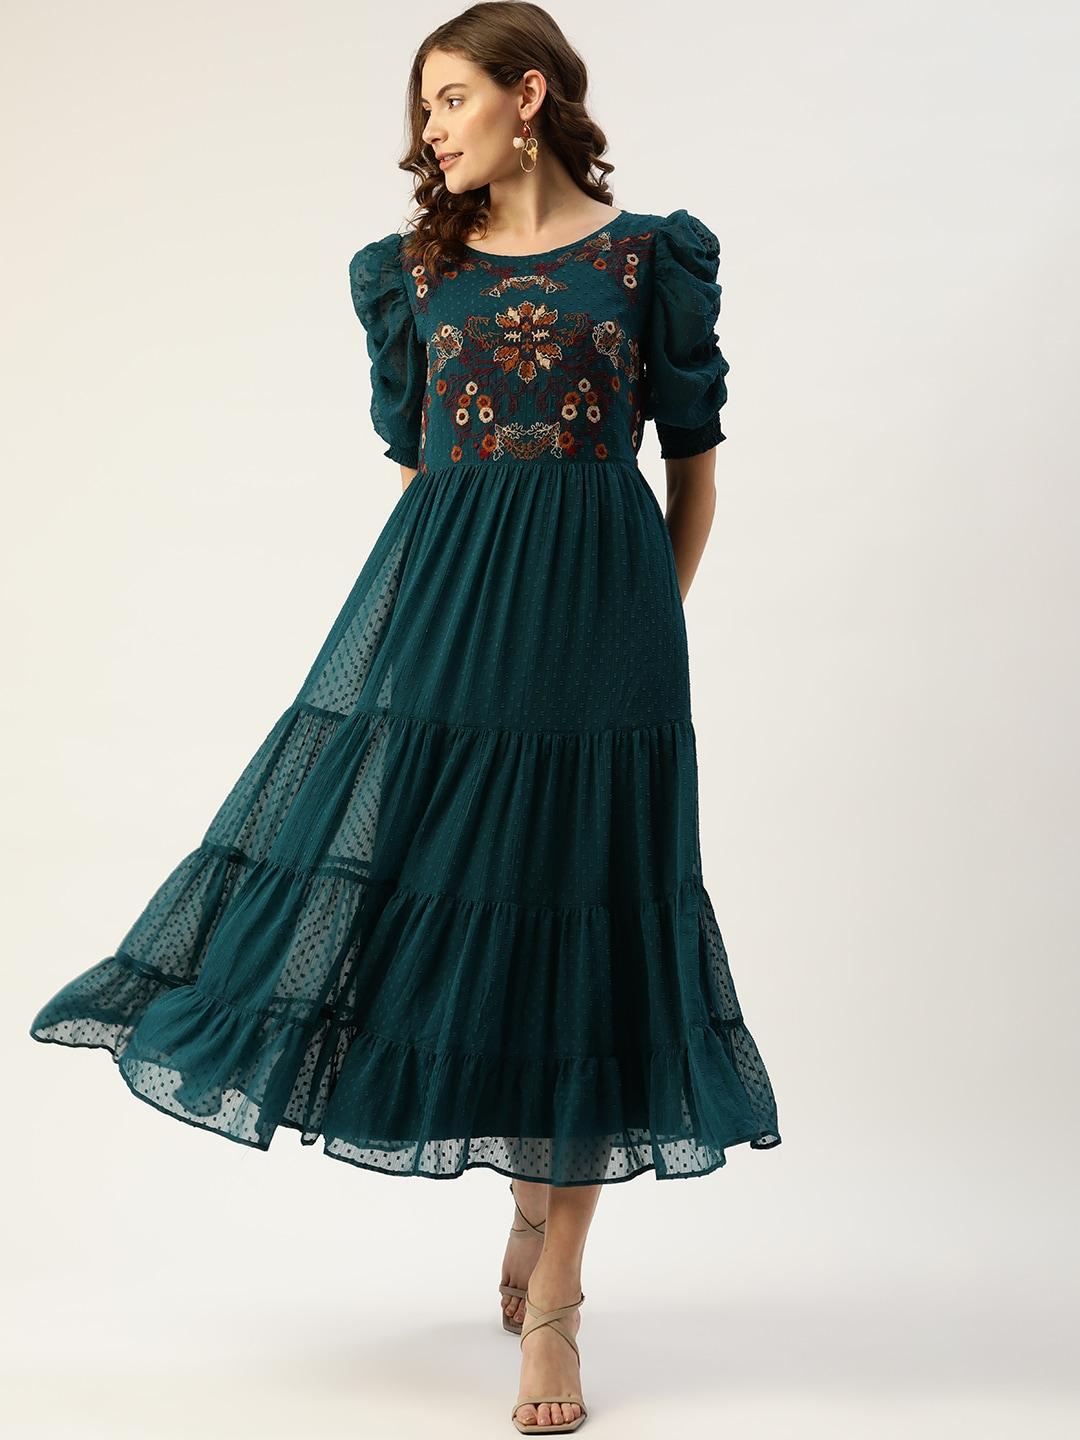 Antheaa Teal Green & Brown Floral Dobby Woven Embellished Maxi Tiered Dress